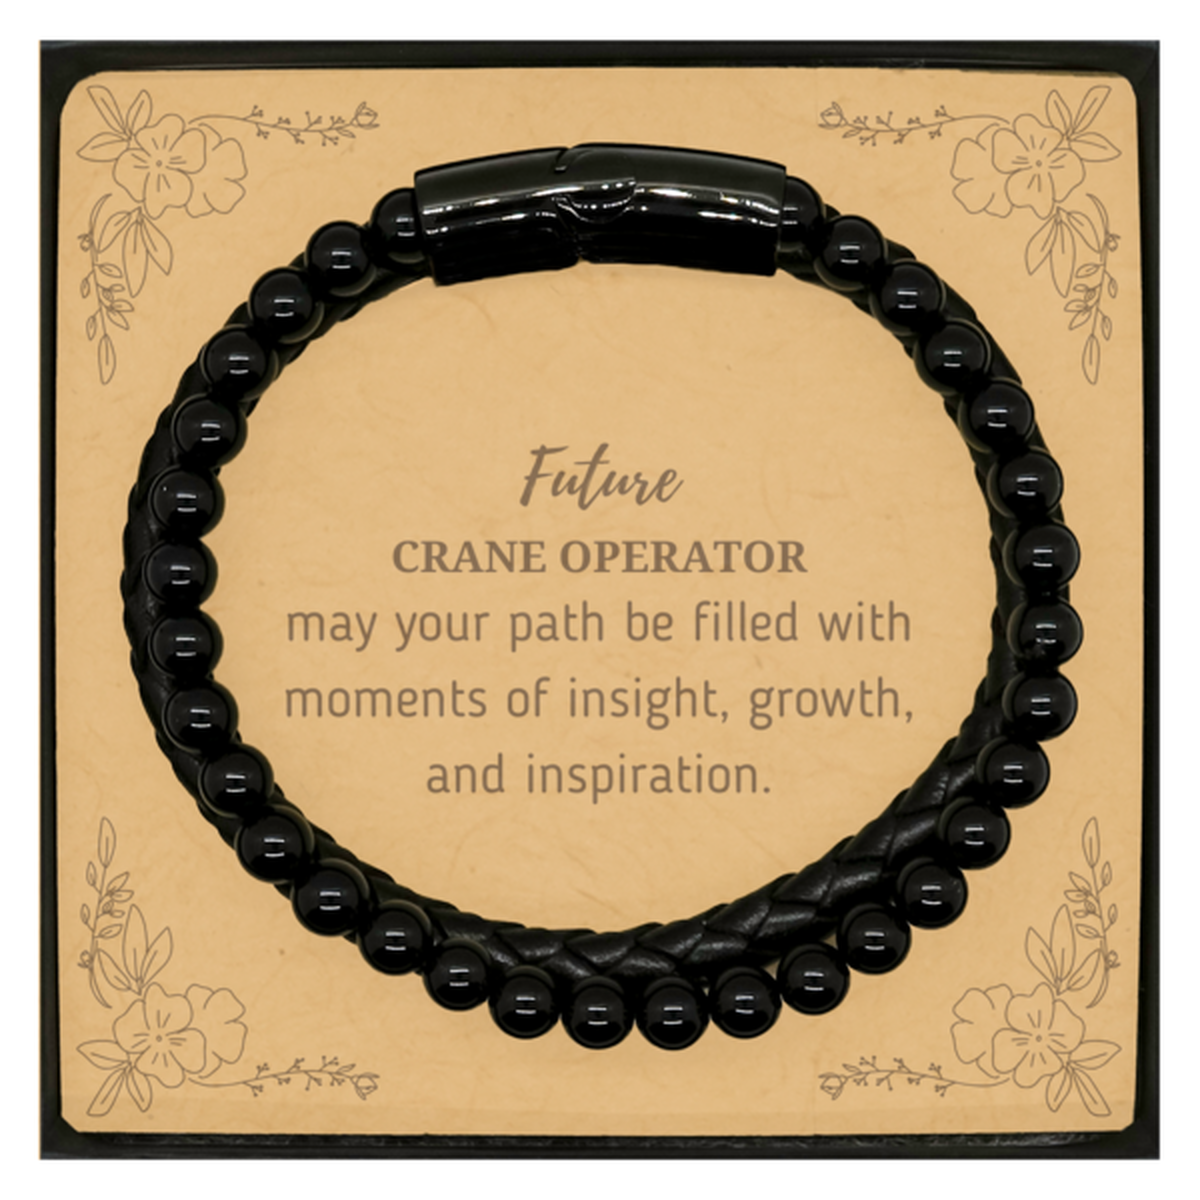 Future Crane Operator Gifts, May your path be filled with moments of insight, Graduation Gifts for New Crane Operator, Christmas Unique Stone Leather Bracelets For Men, Women, Friends